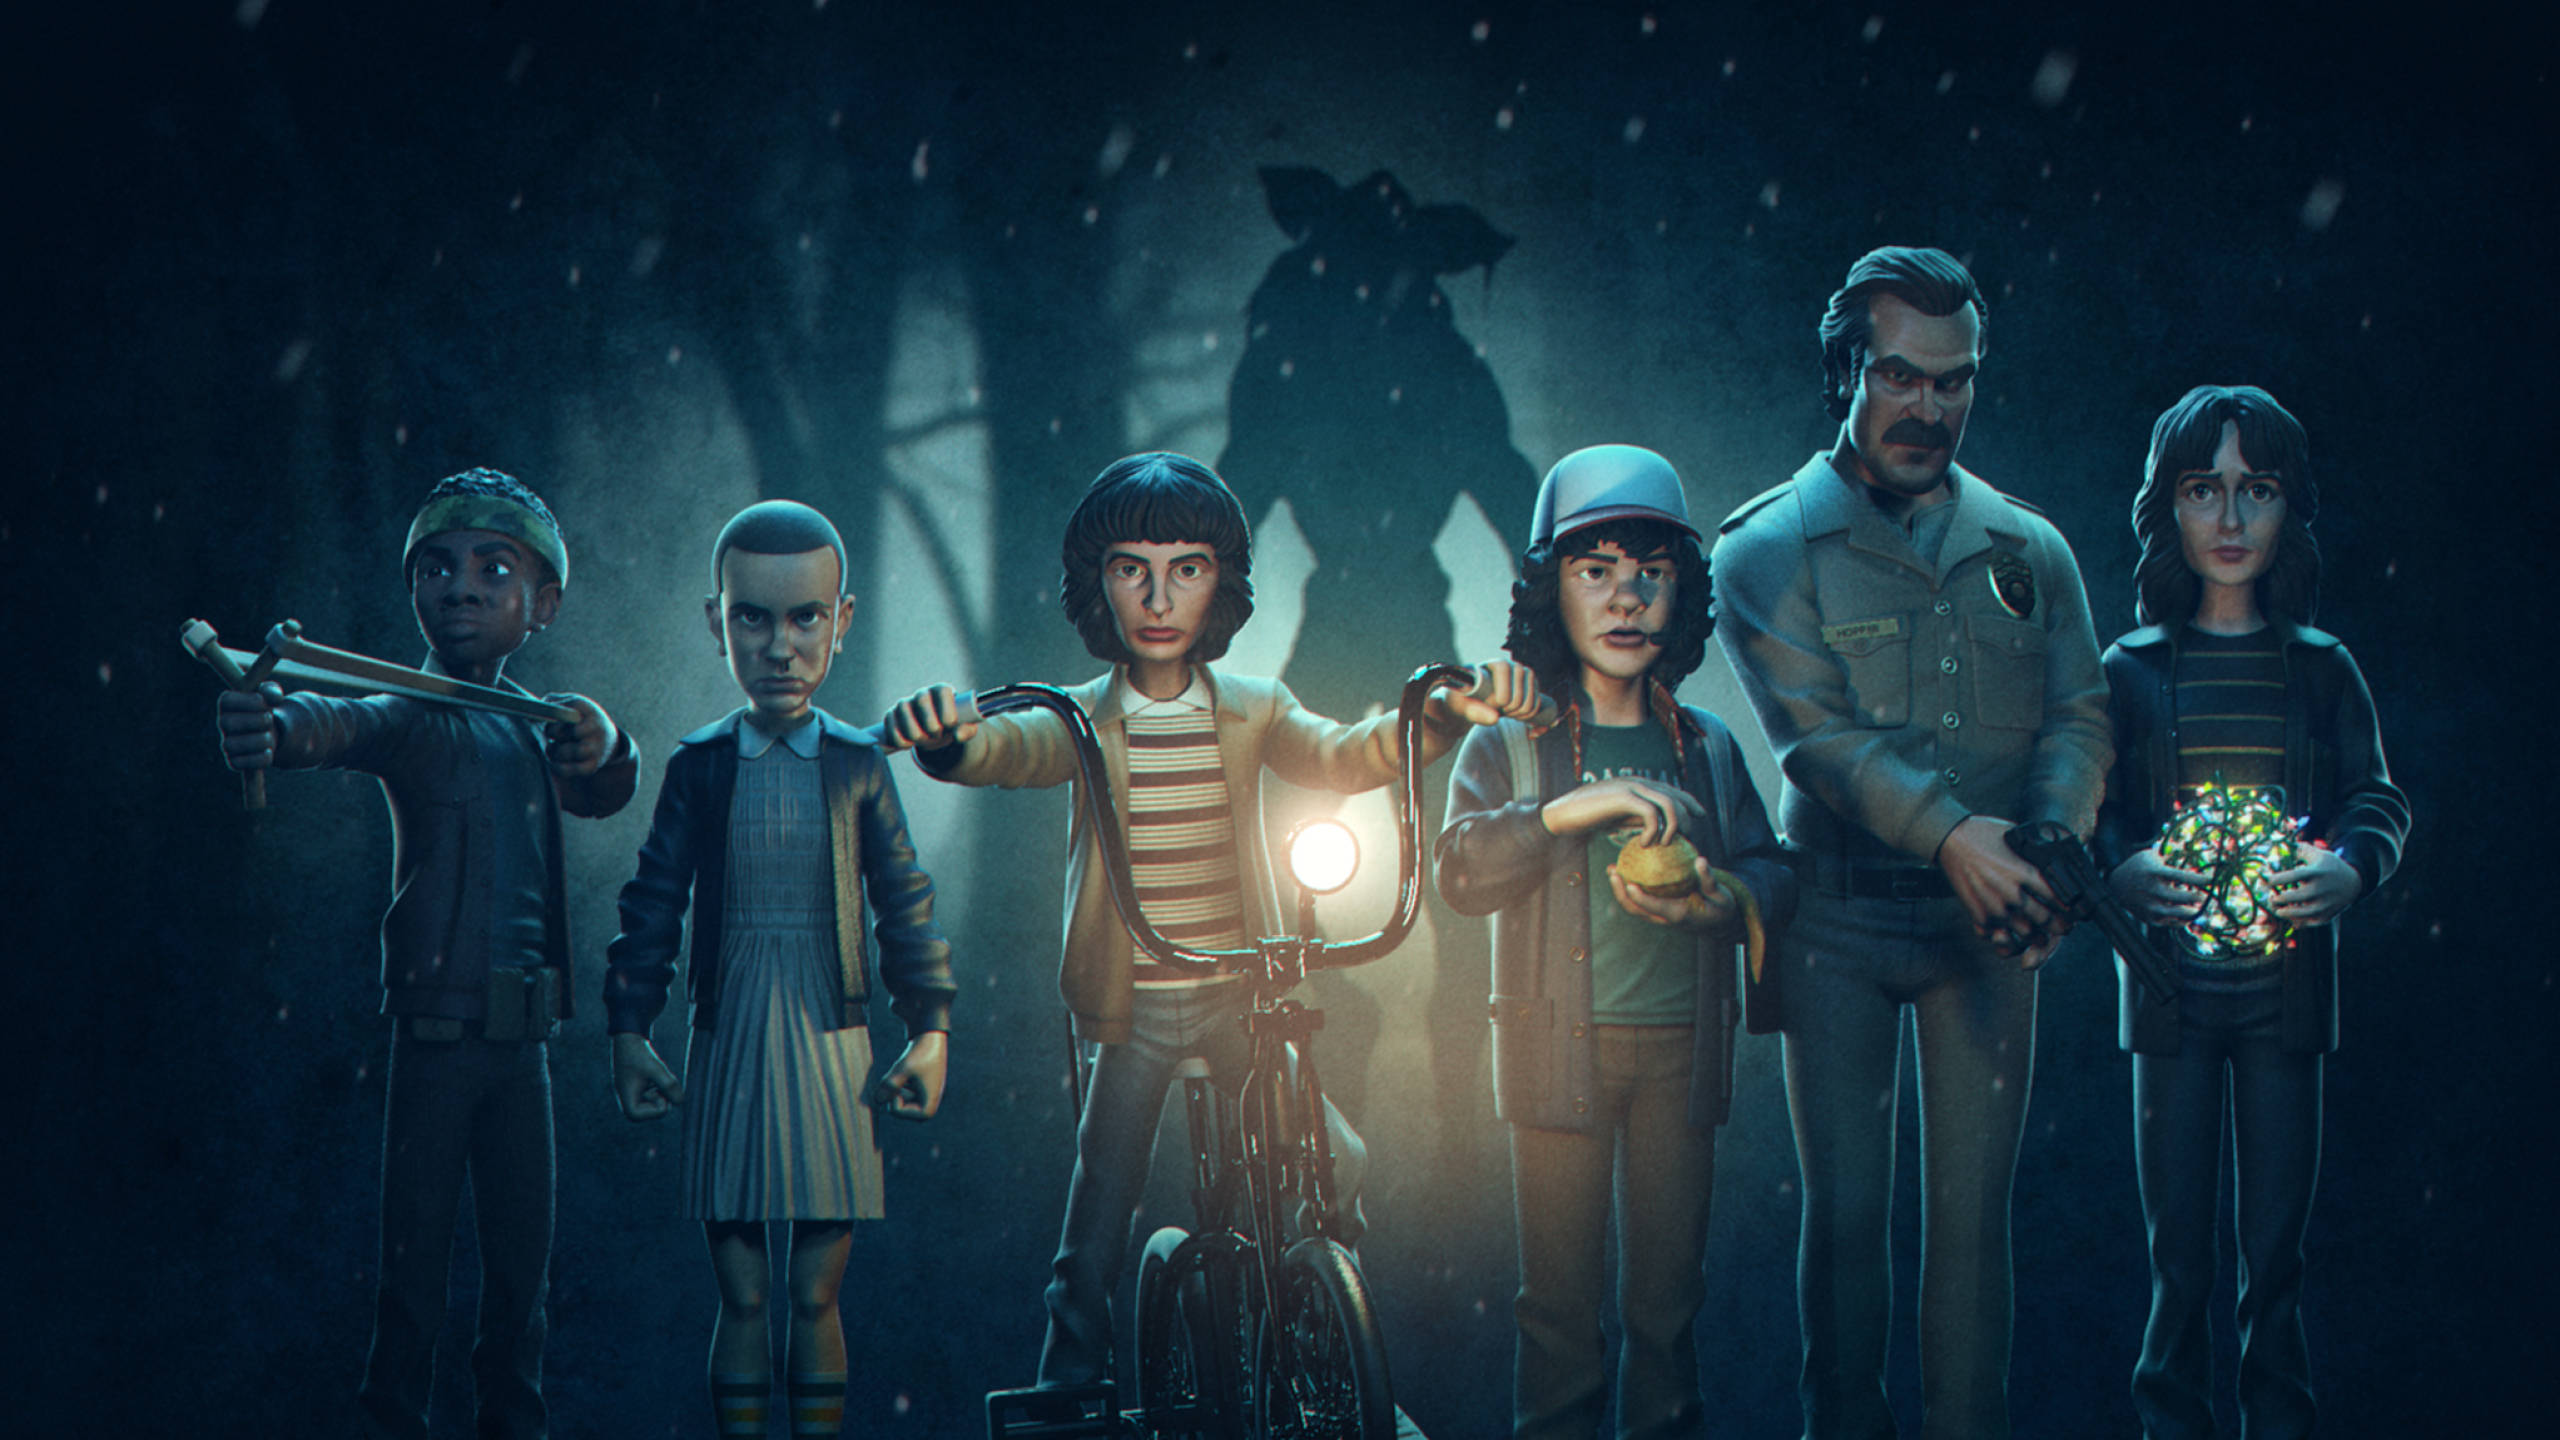 Carefully selected 38 best Stranger Things Wallpapers, you can download in one click. All of these high quality desktop backgrounds are available in HD.